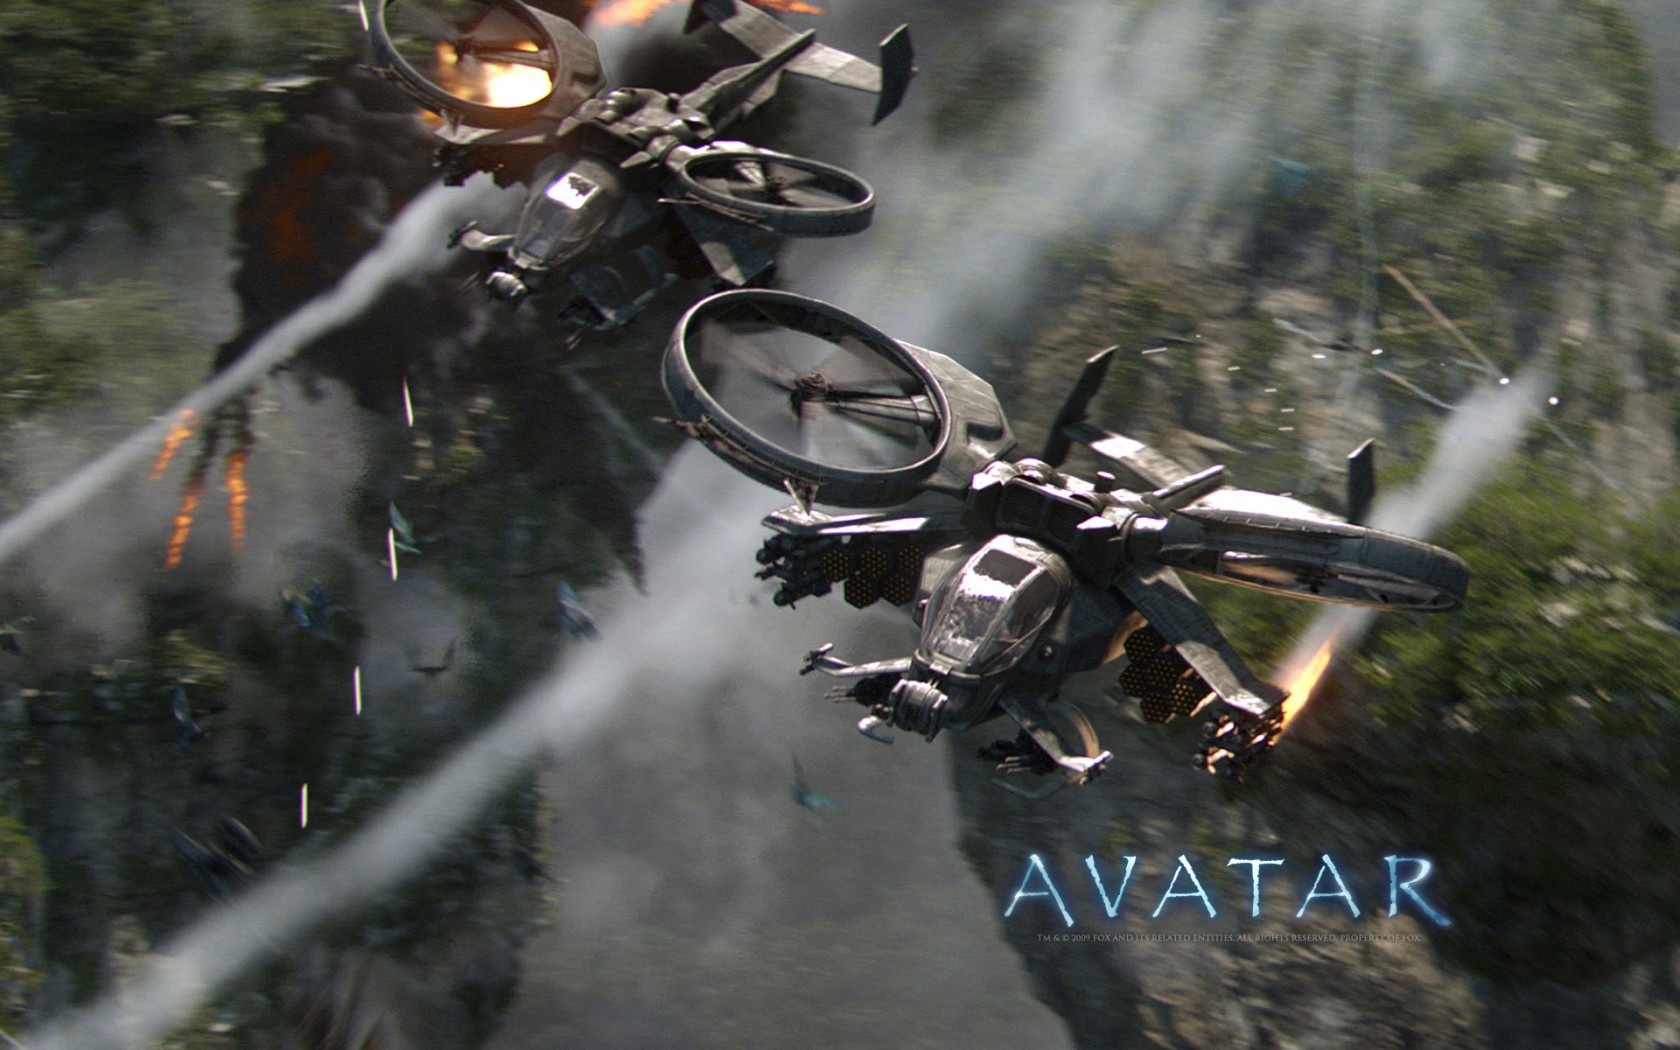 Avatar Hd Movie Download For Mobile